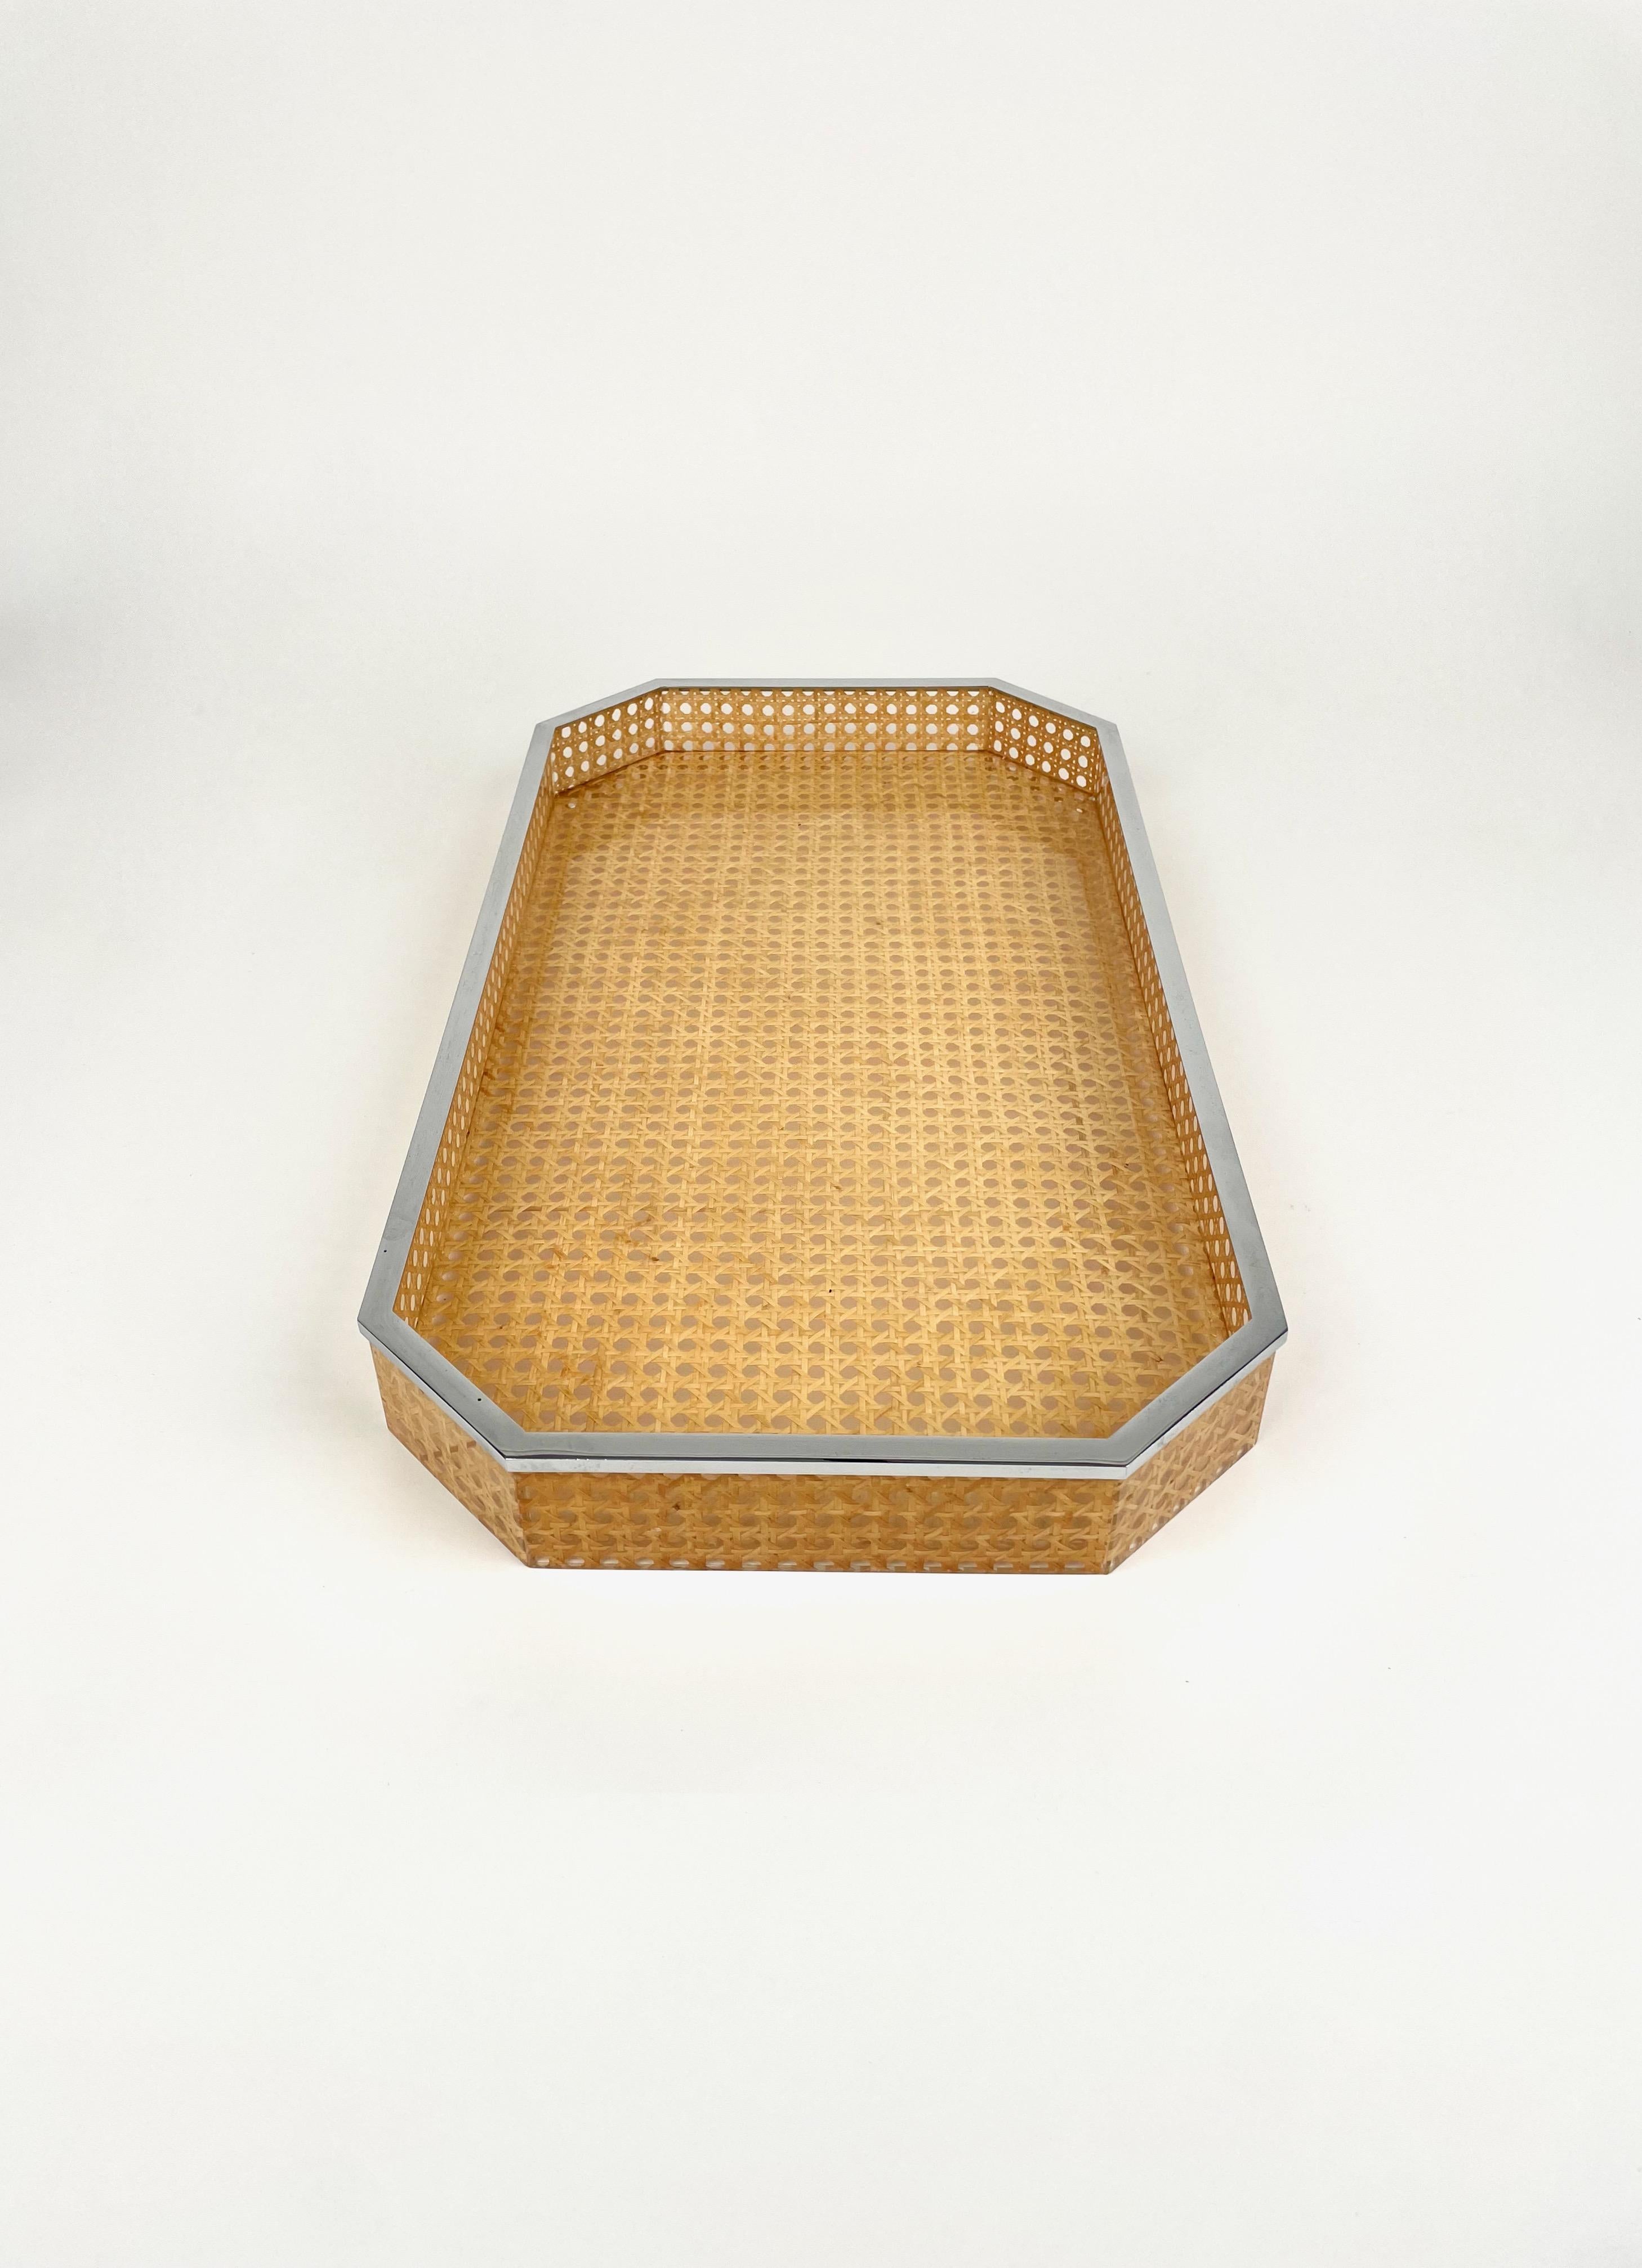 Centerpiece Tray Lucite, Rattan & Chrome Christian Dior Style, Italy, 1970s 3